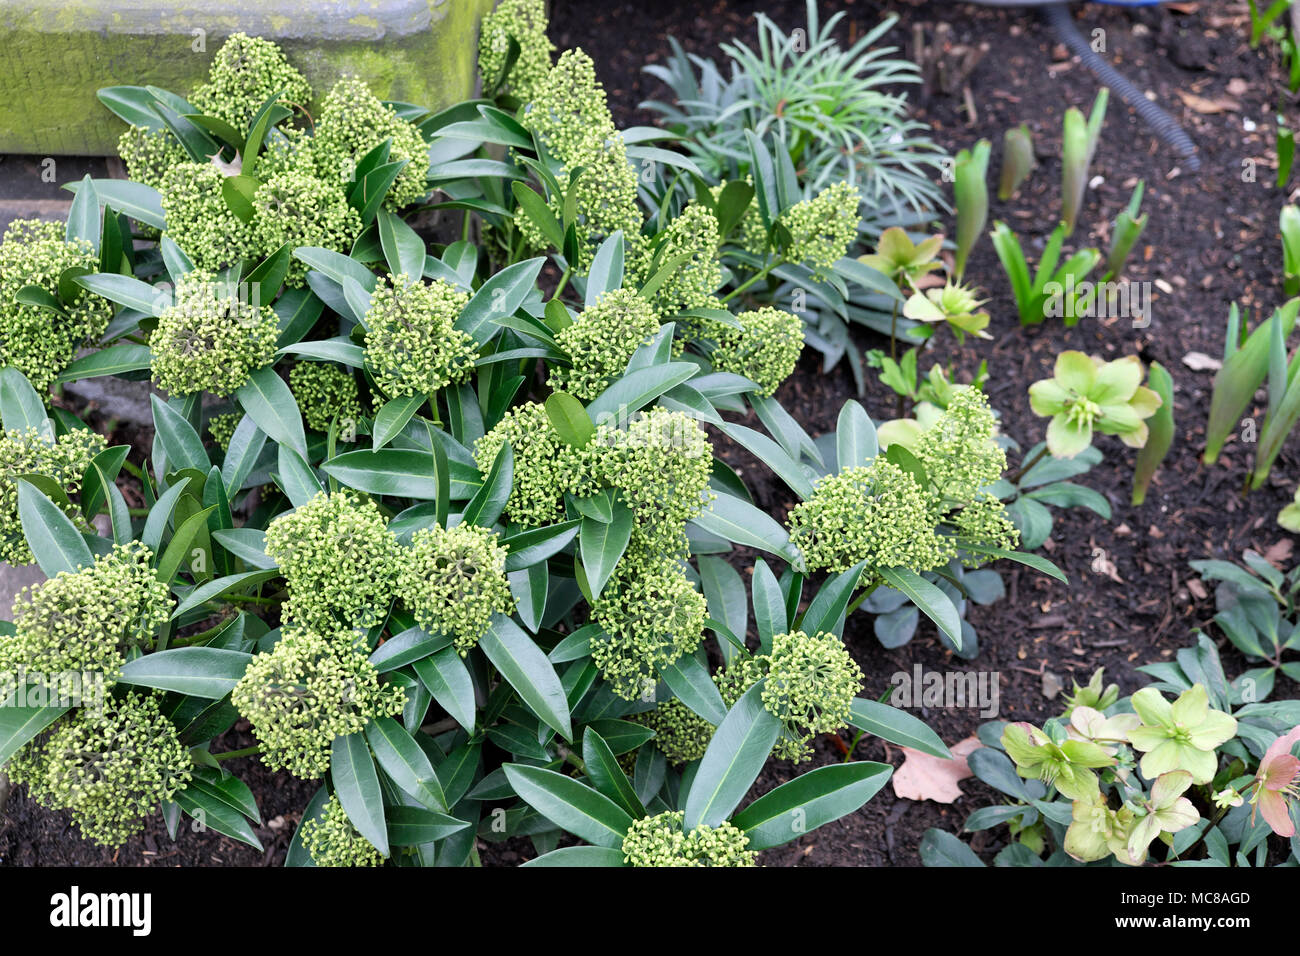 Skimmia x confusa 'Kew Green'  fragrant shrub with closed buds growing in winter a garden whose flowers will bloom in spring London UK  KATHY DEWITT Stock Photo